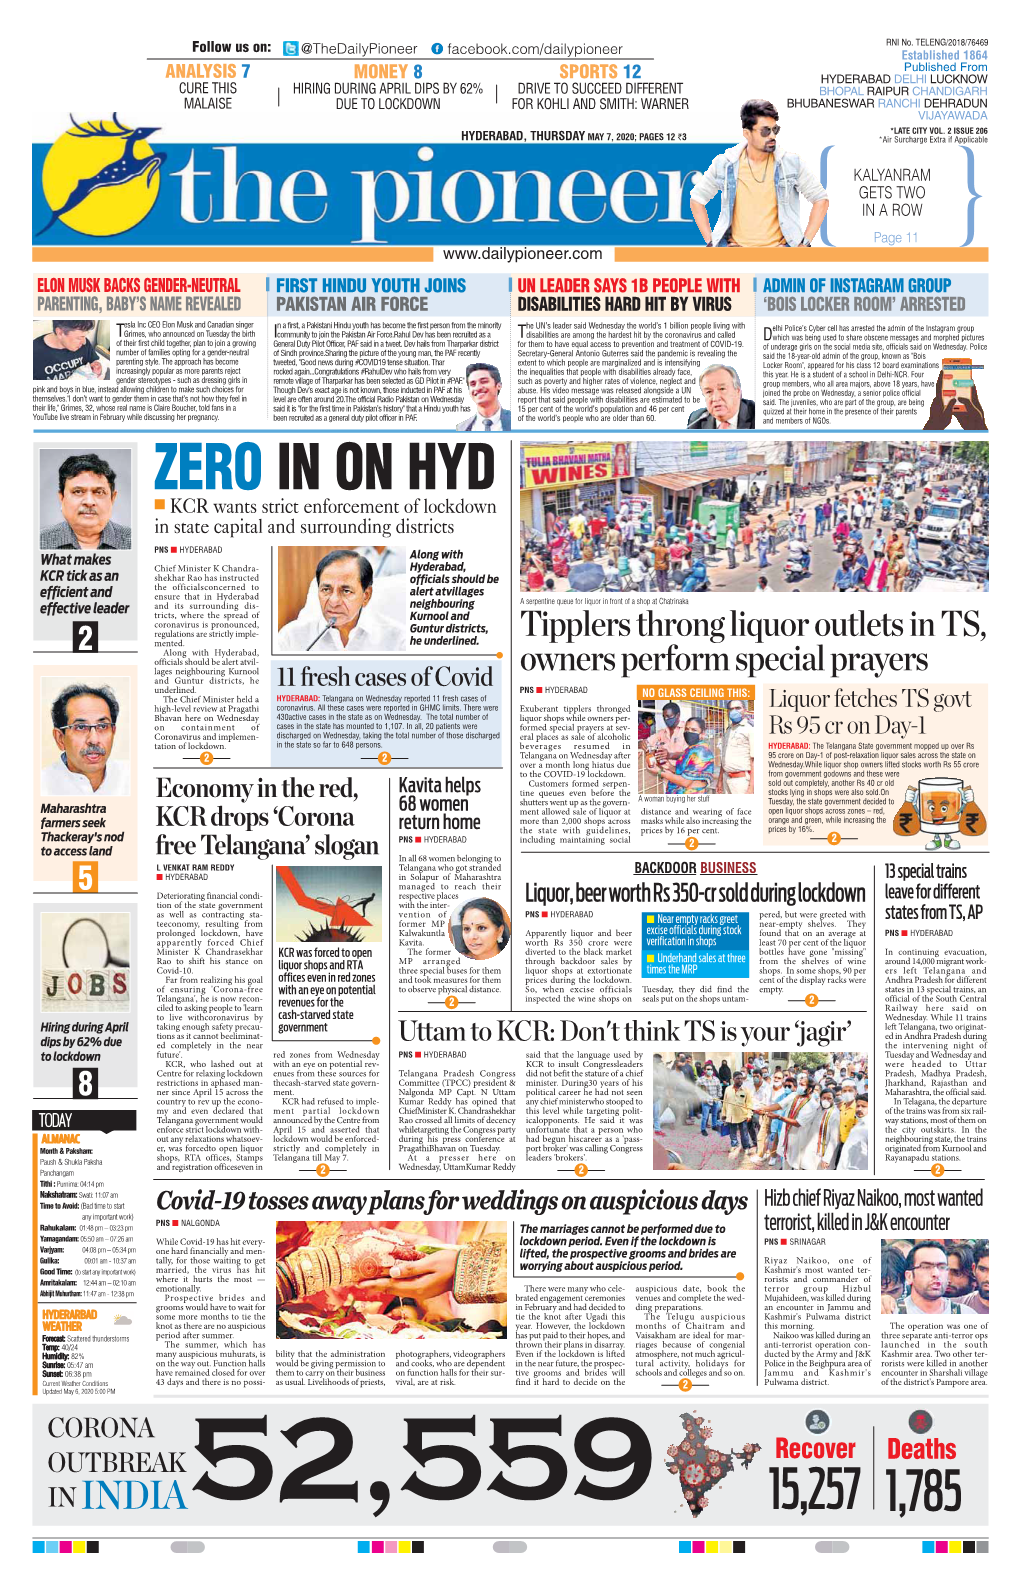 ZERO in on HYD N KCR Wants Strict Enforcement of Lockdown in State Capital and Surrounding Districts